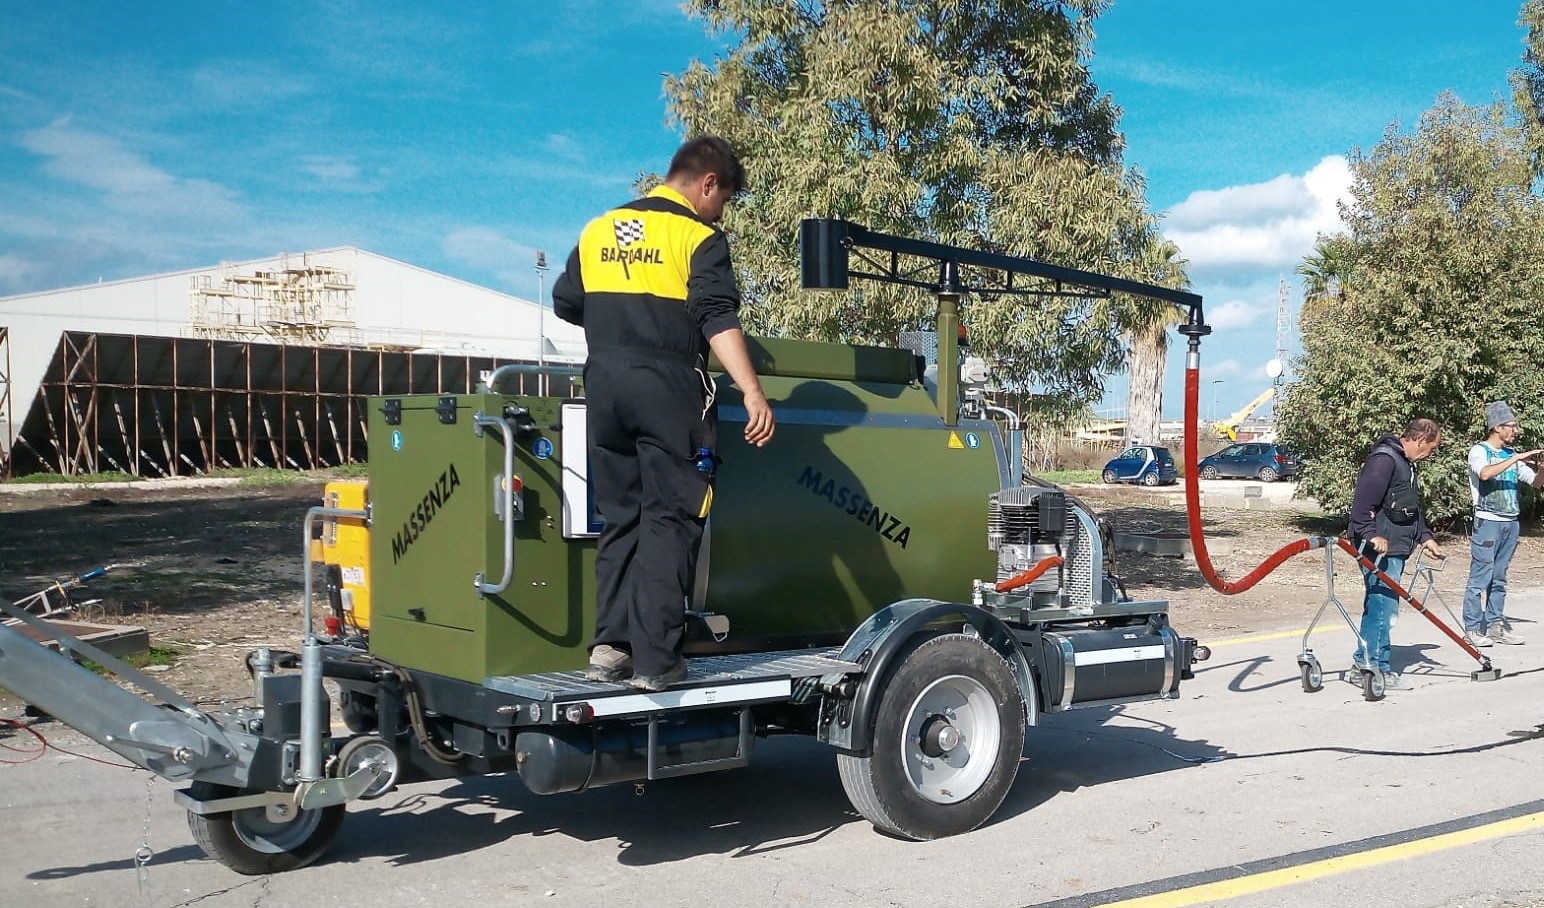 Green for go: the proven Sealmass M5from Massenza is headed to Italy’s Sigonella air base in Sicily for melting sealing compound and applying it in cracks and joints on the runway and surrounding areas (image courtesy Massenza)